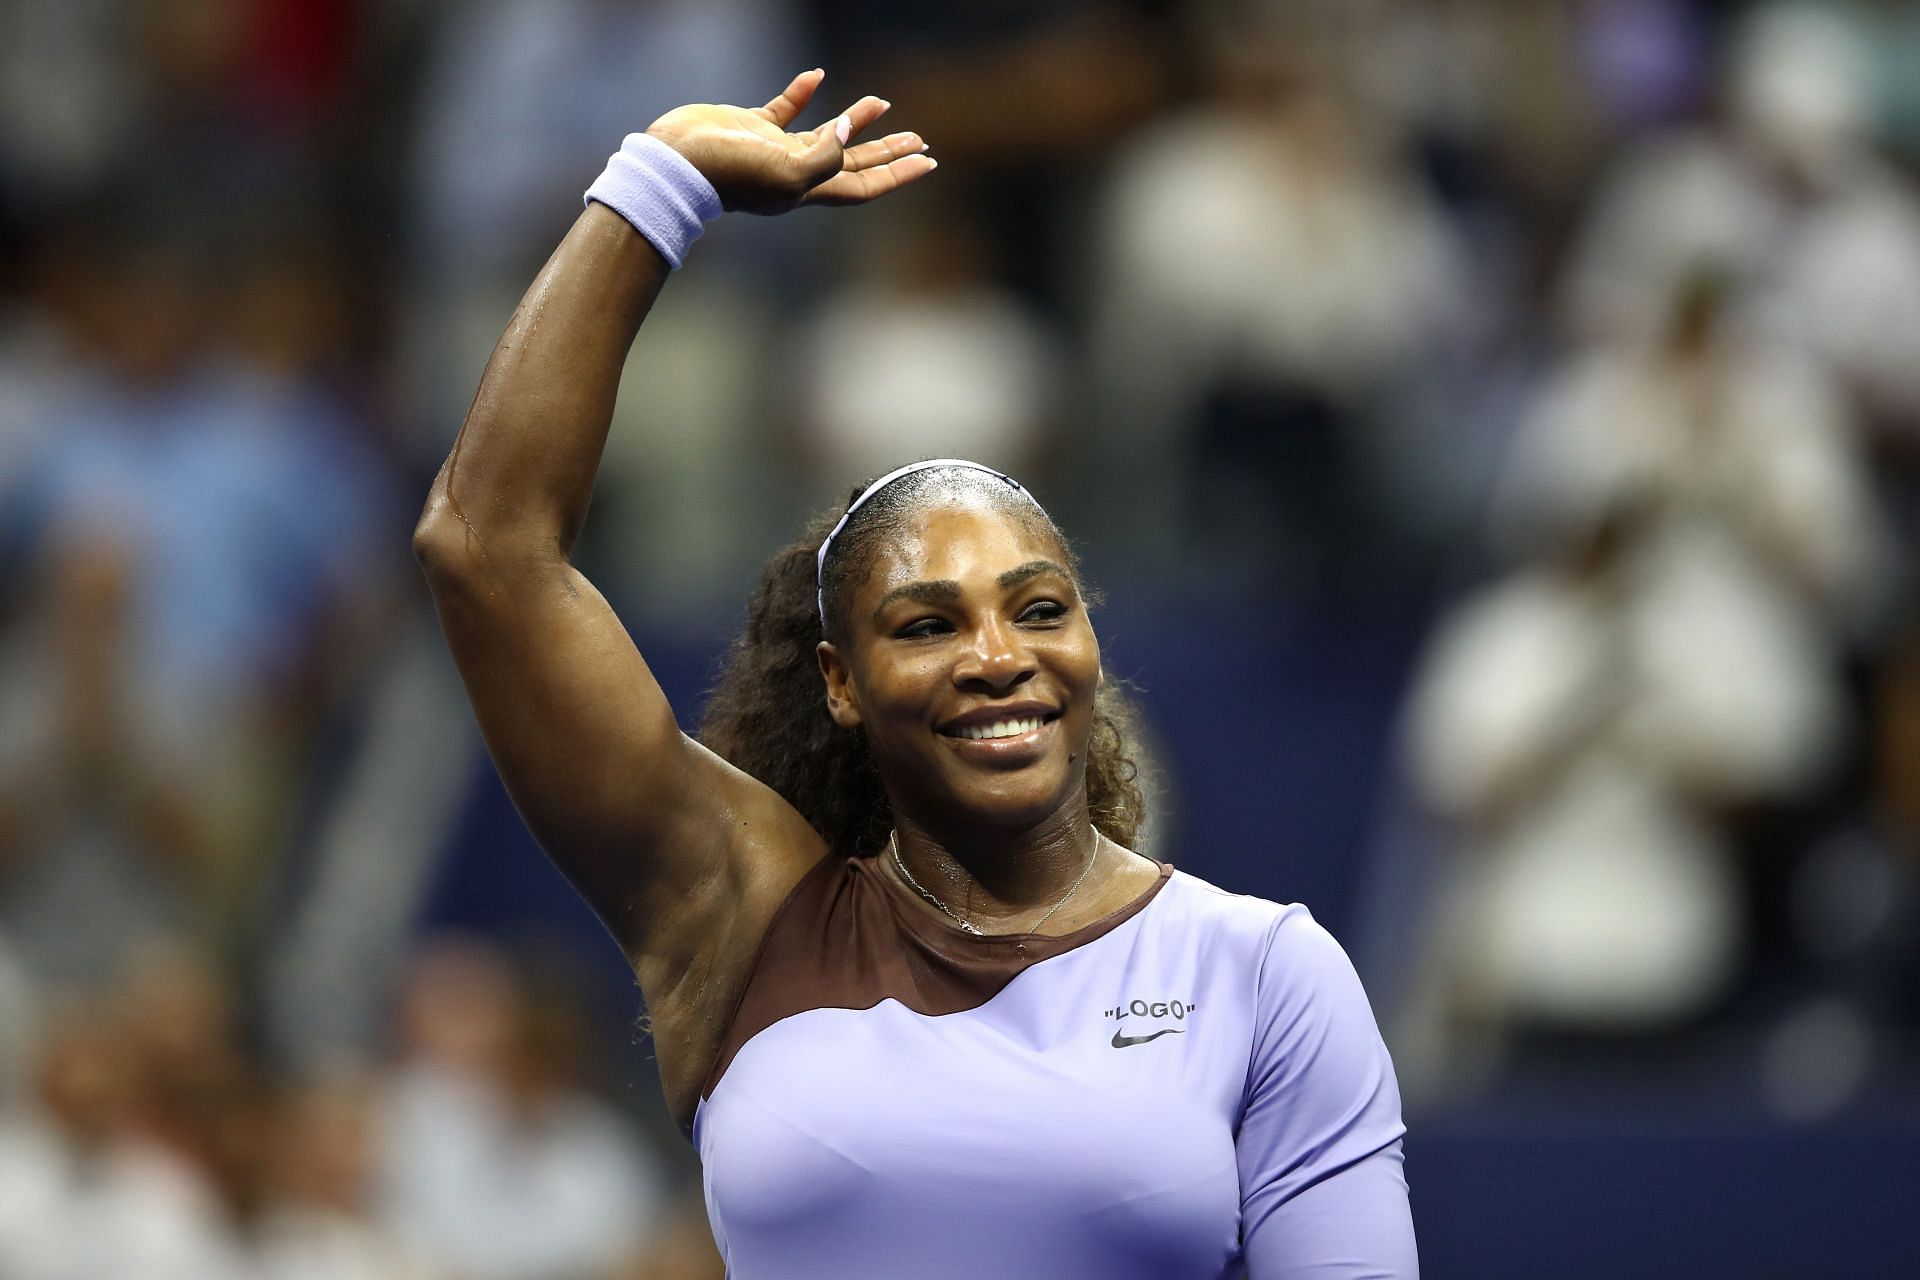 Serena Williams at the 2018 US Open.